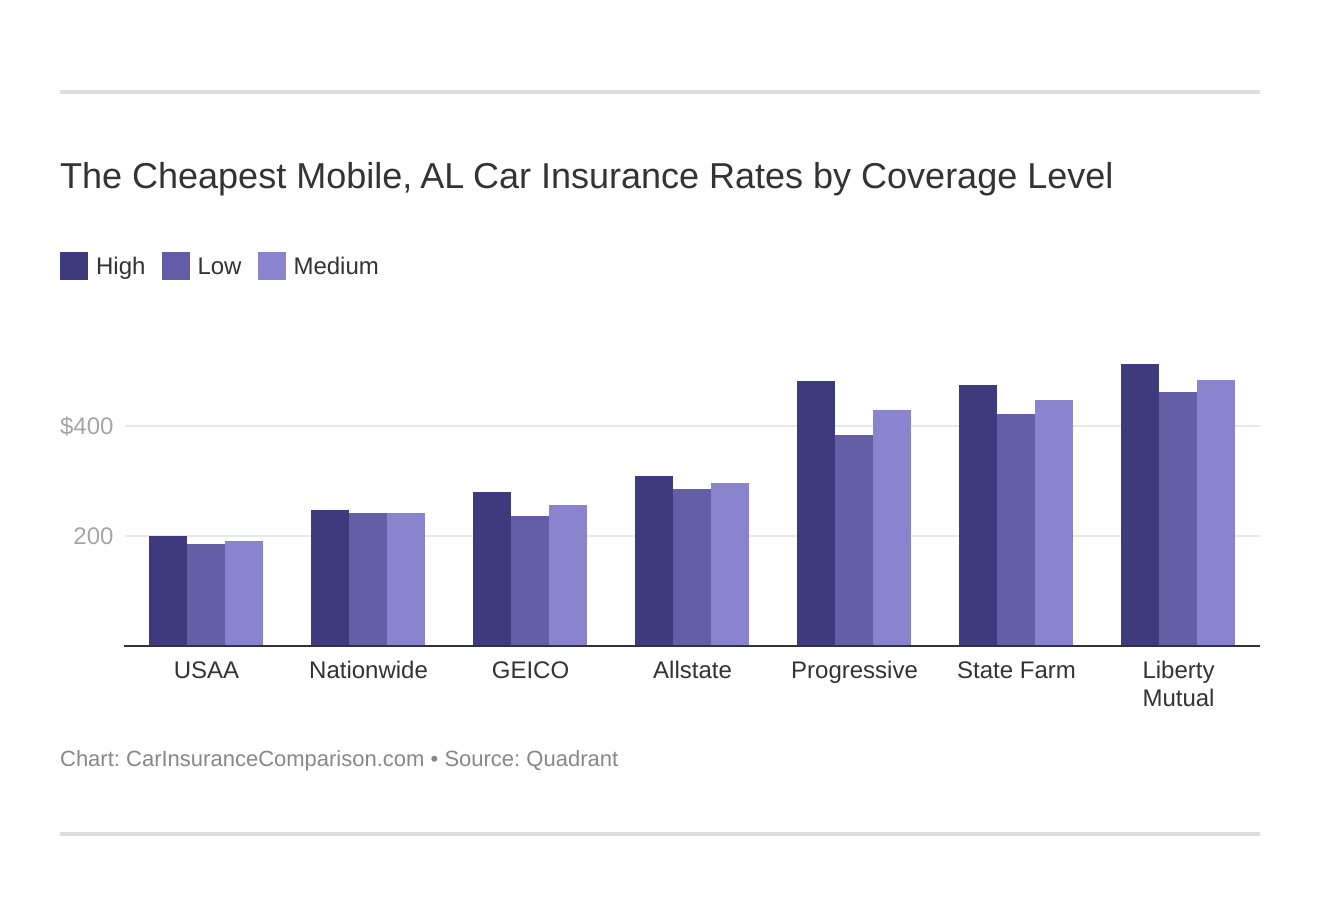 The Cheapest Mobile, AL Car Insurance Rates by Coverage Level